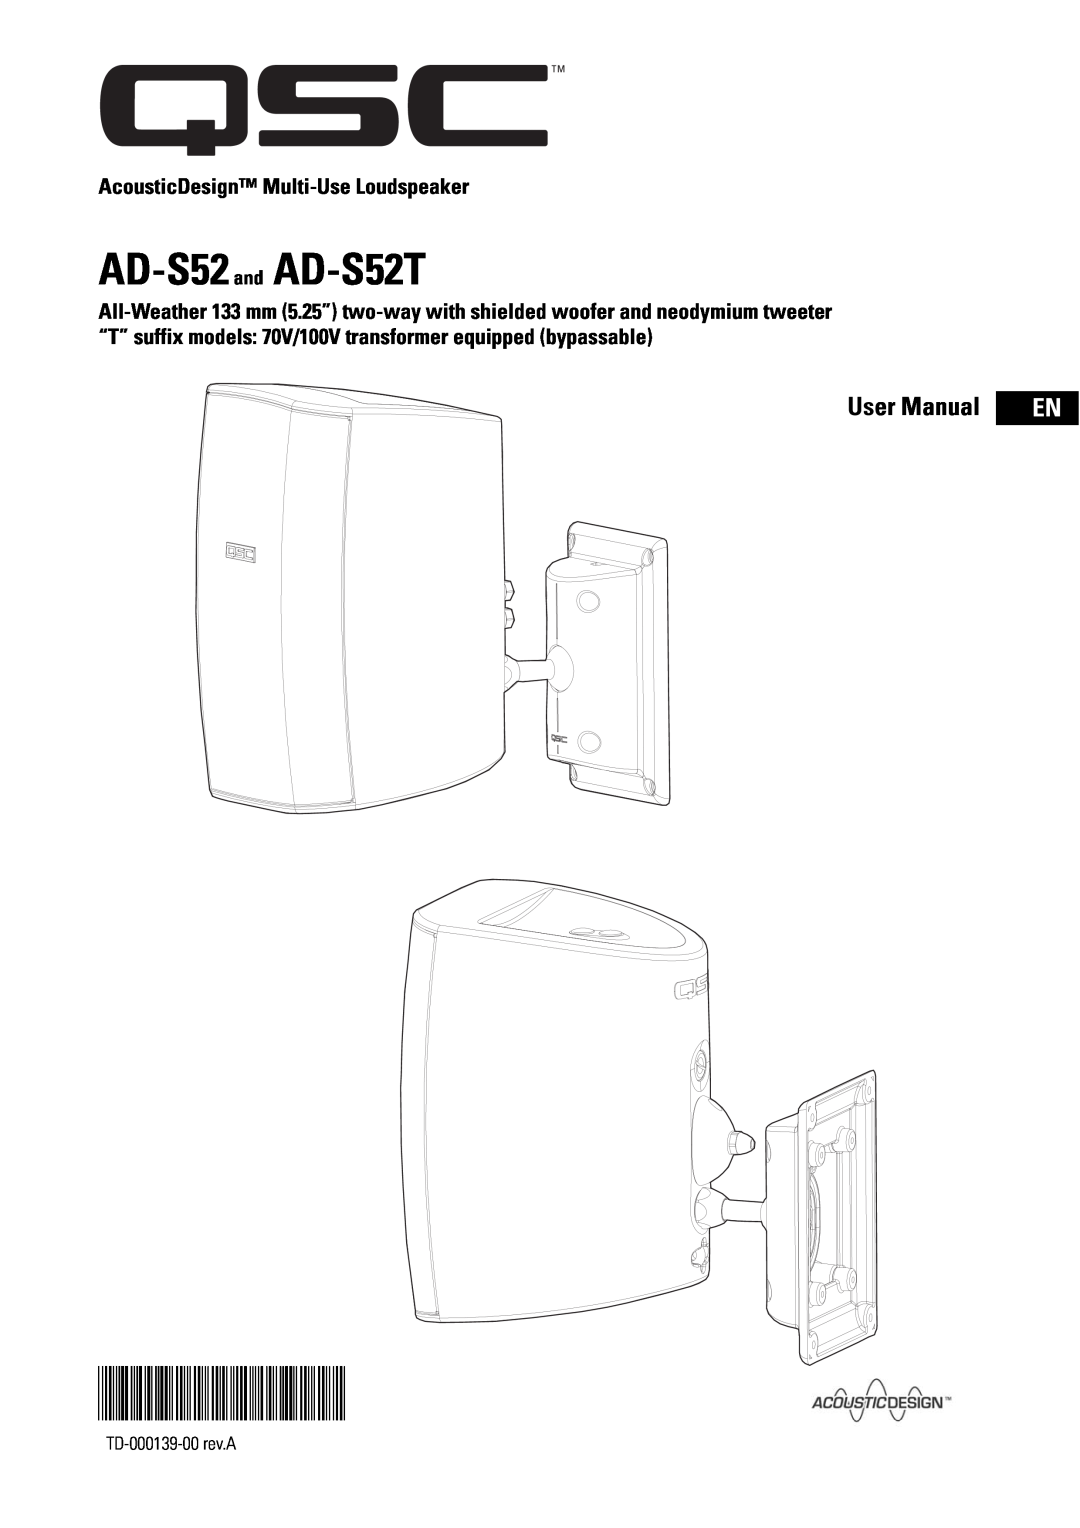 QSC Audio ADS52 user manual AcousticDesign Multi-UseLoudspeaker, TD-000139-00, AD-S52 and AD-S52T 